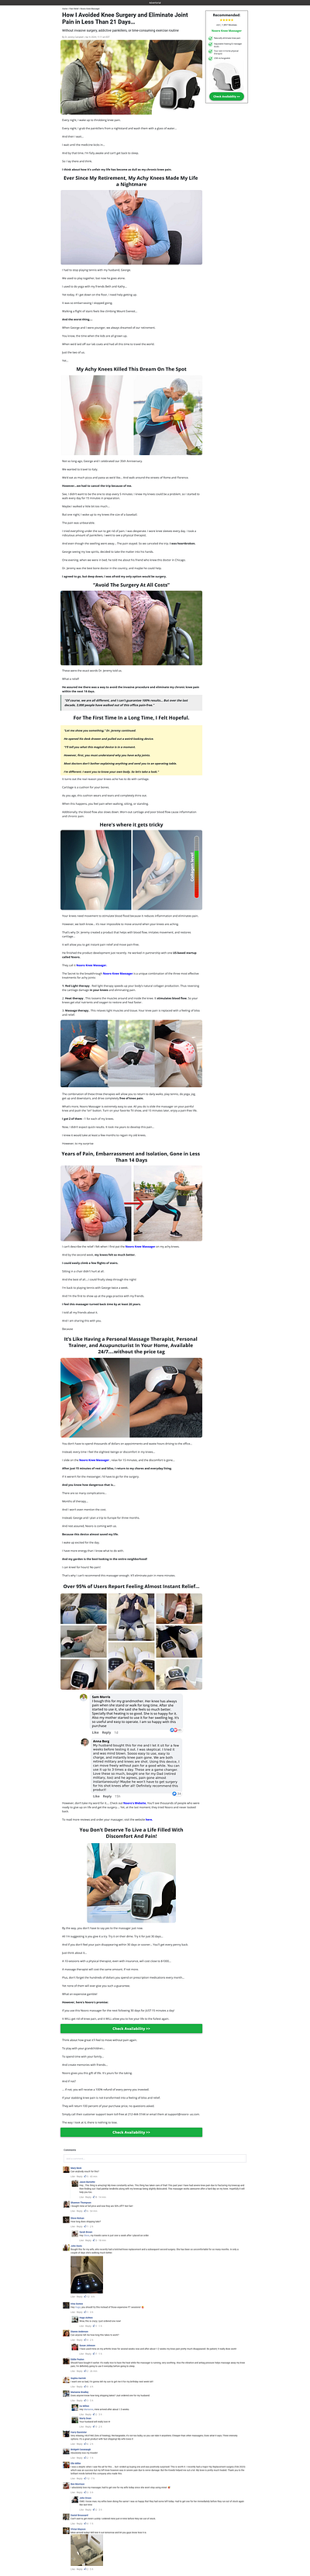 Nooro Knee Massager Funnelish Advertorial Page advertorial page sample funnel funnelish funnelish advertorial page funnelish funnel sample funnelish landing page funnelish ready made funnel funnelish ready made template funnelish template most popular funnelish template sales funnel sales page